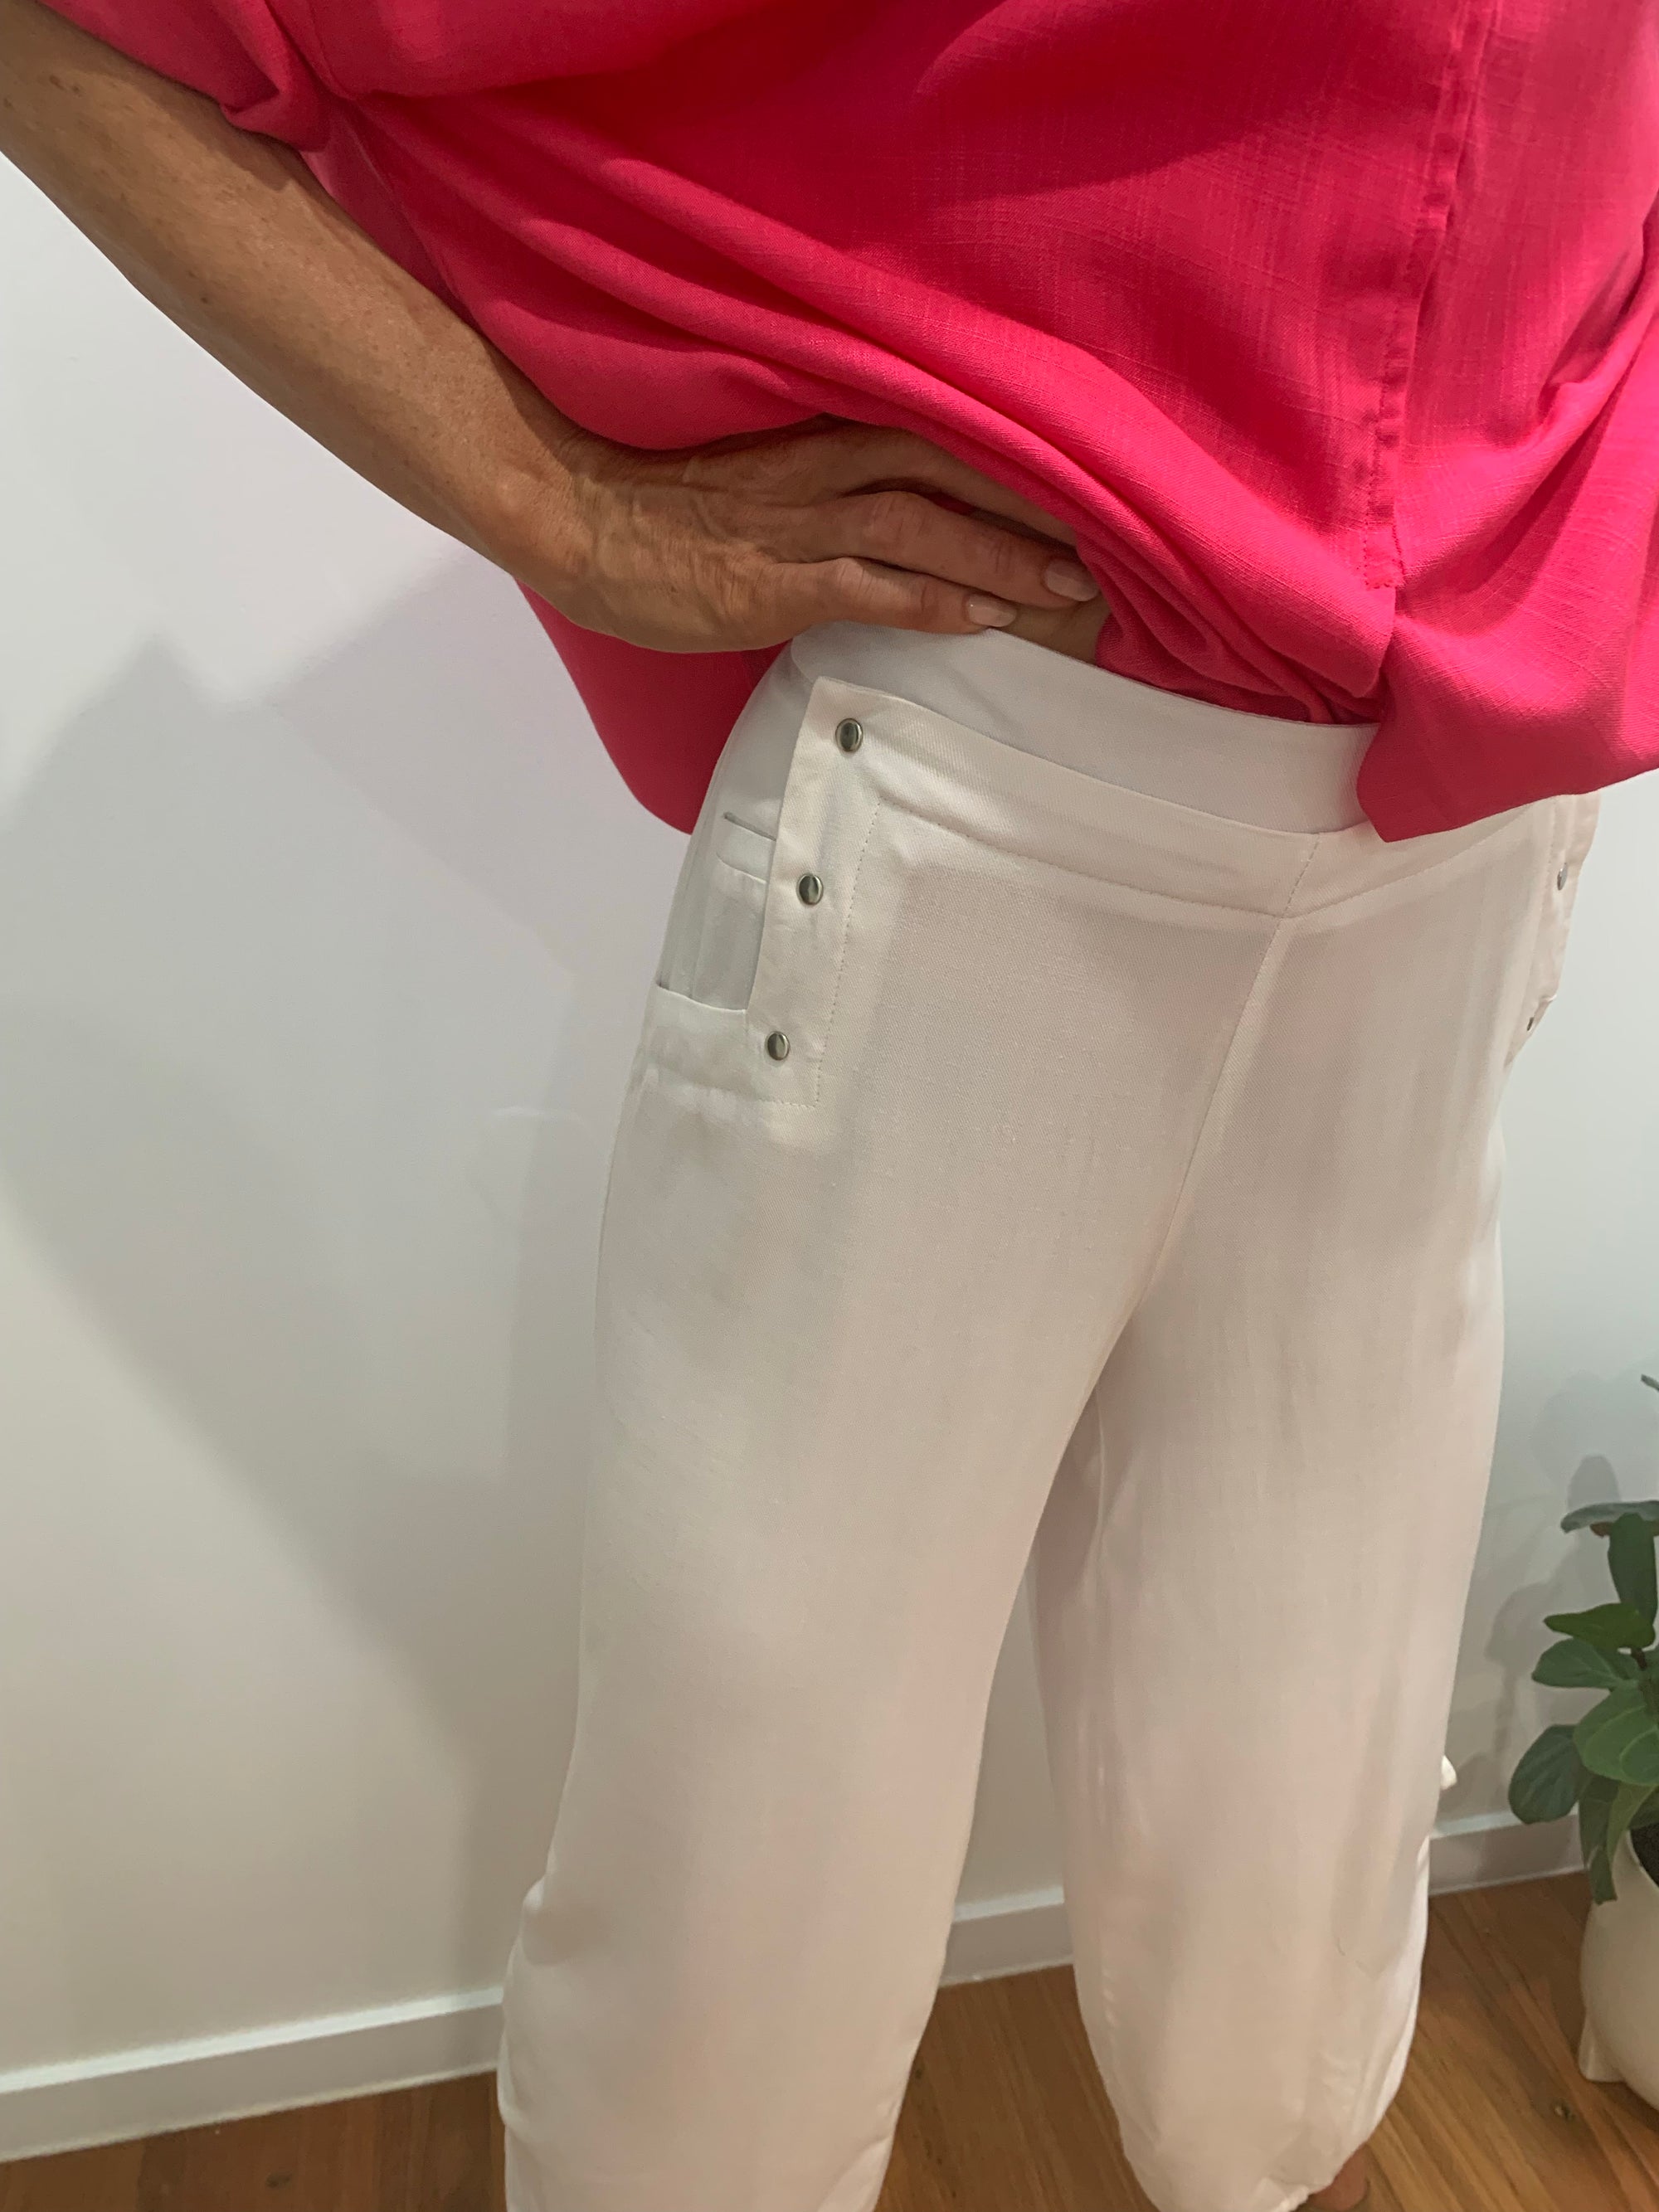 White Pants with Ties and Stud Details Comfort and Elegance Elastic Waist